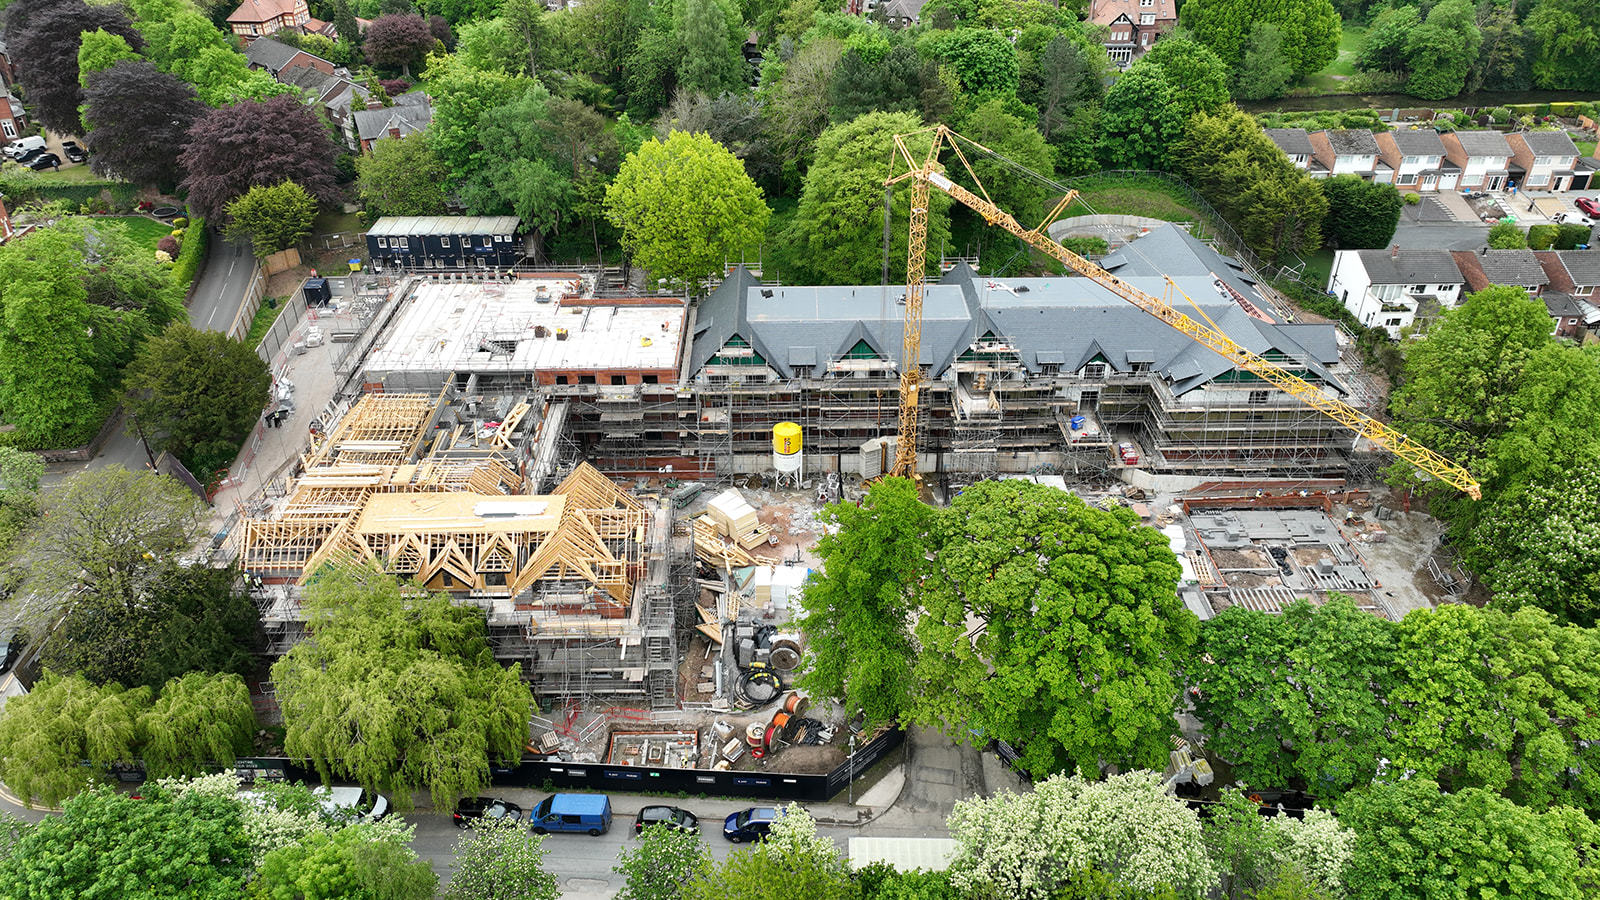 Drone shots show the progress of the new care facility on the former Lymm Hotel site